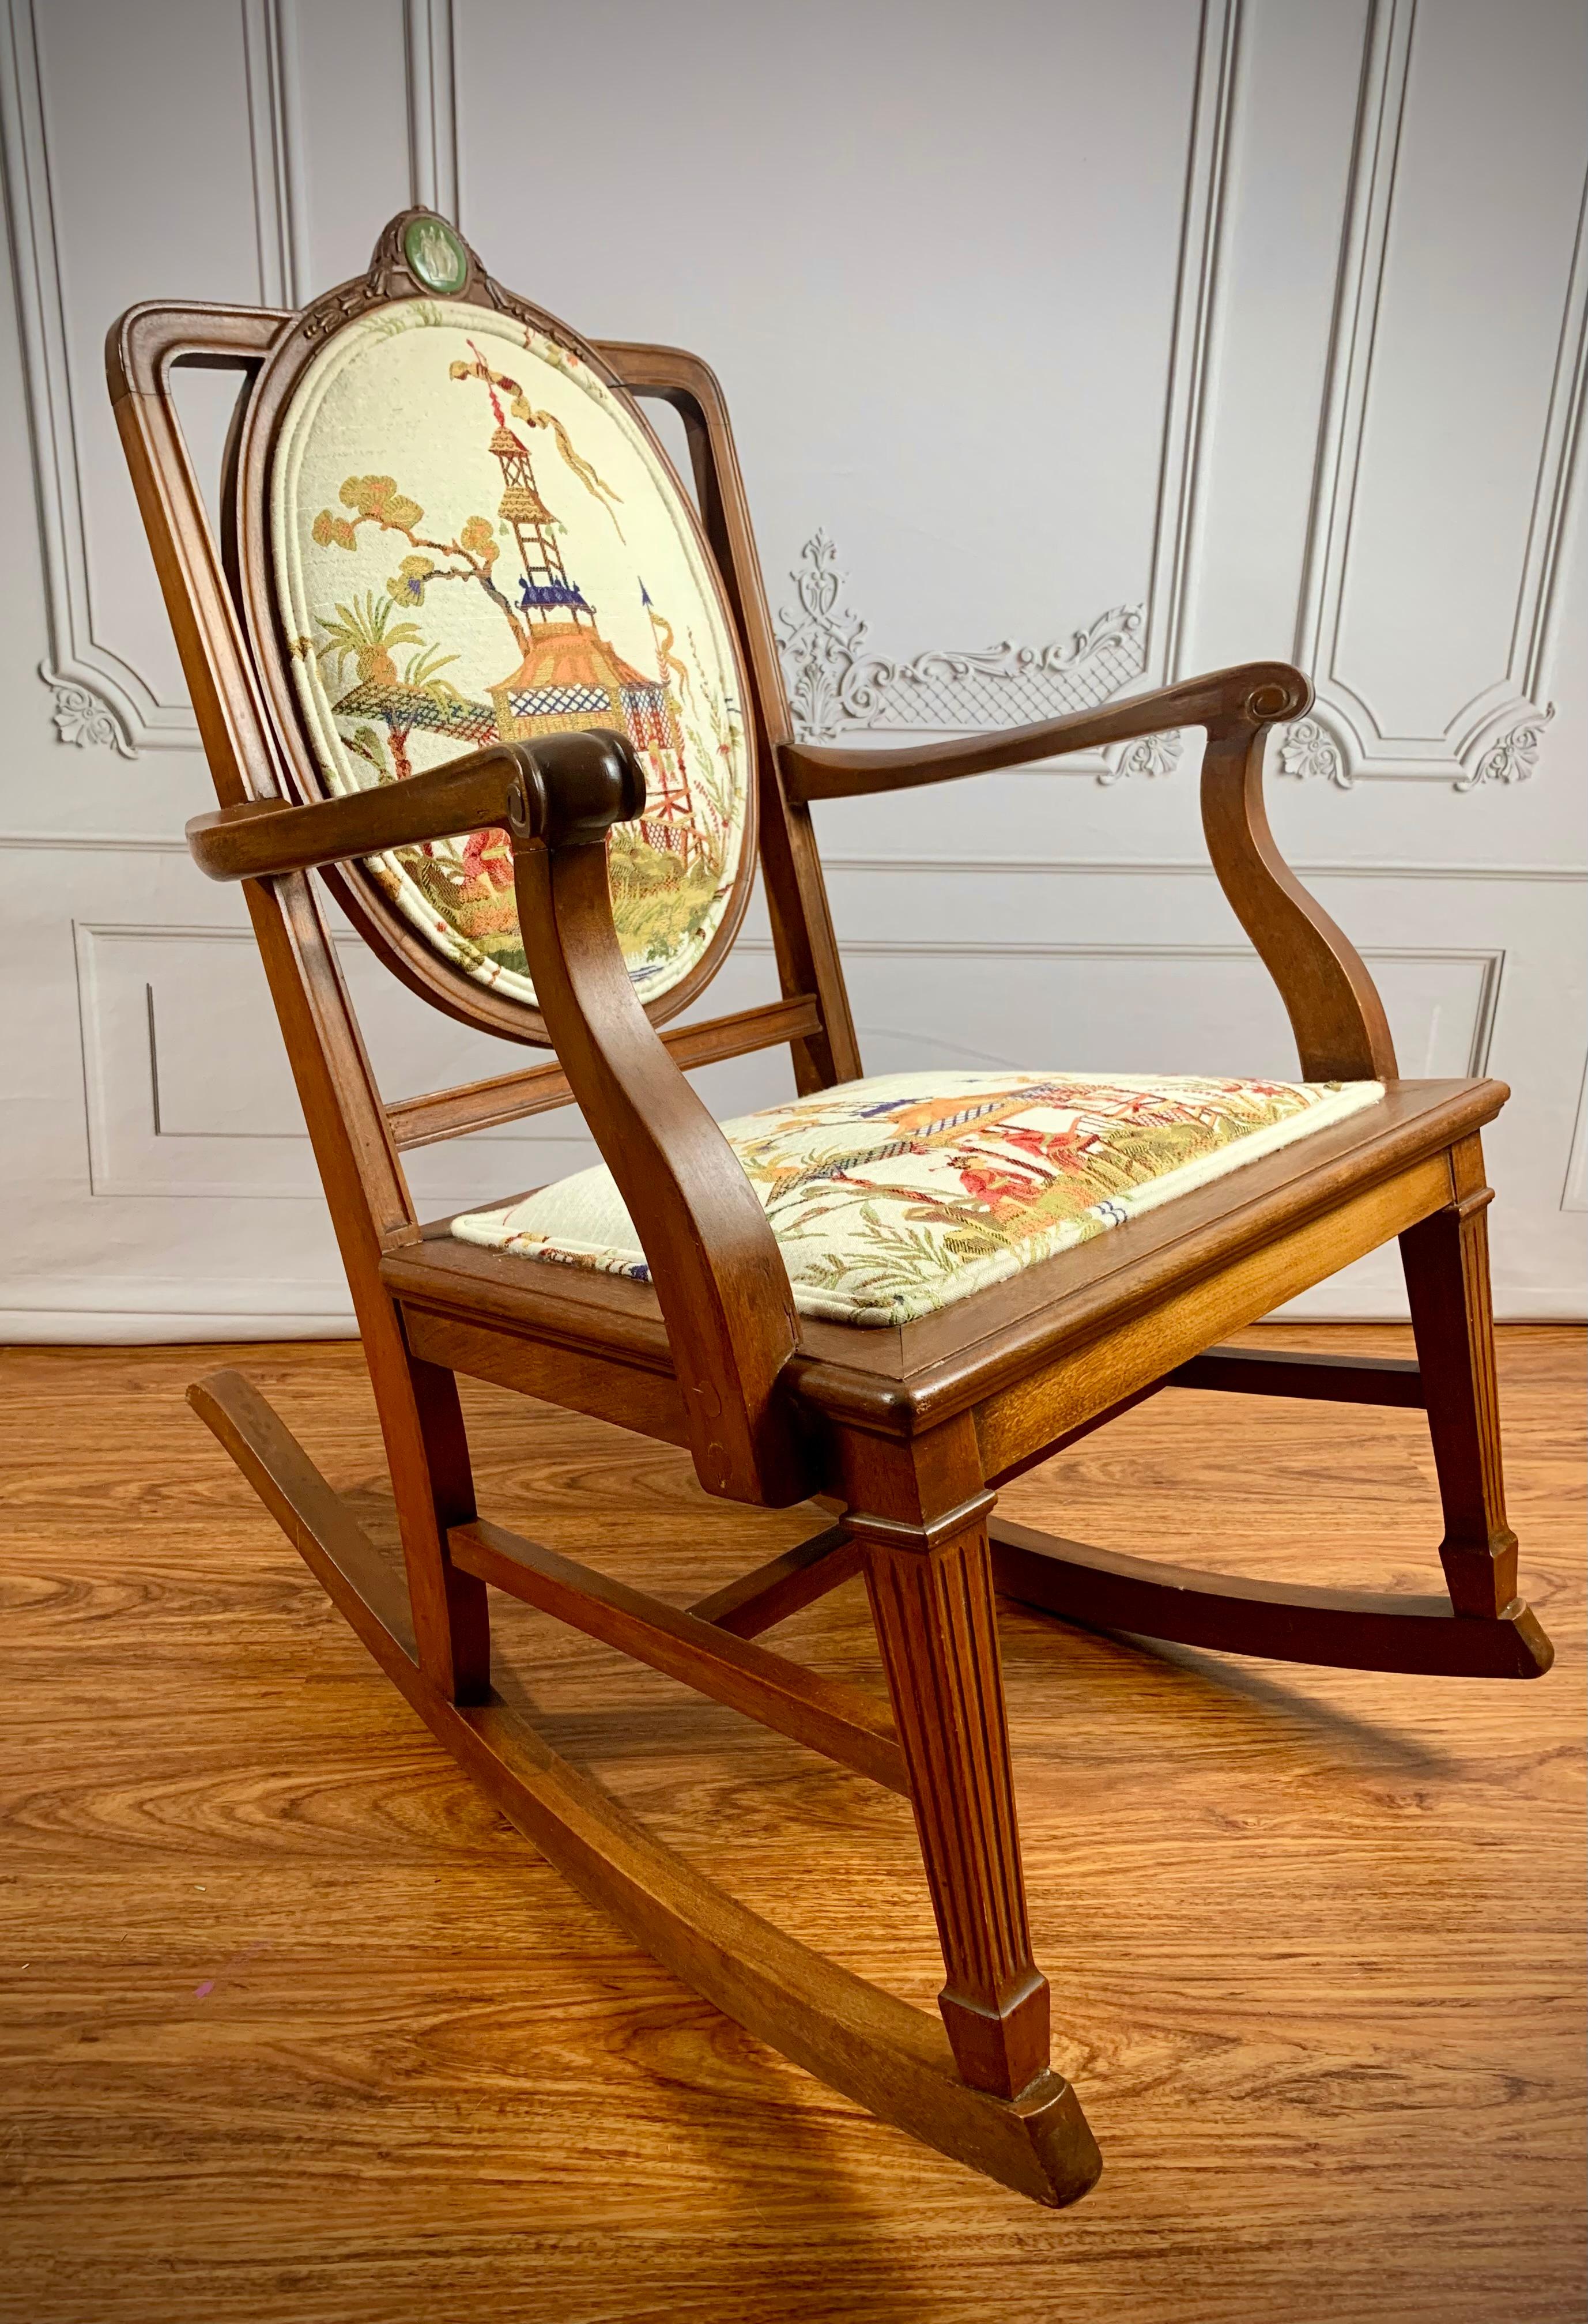 Late 19th century Neoclassical style hardwood rocker with hand-carved armrests, fluted legs, hand-lathed screws. 

Professional custom reupholstery in a beautiful ivory linen featuring a woven Chinoiserie pattern. Crowned with a classic Wedgwood